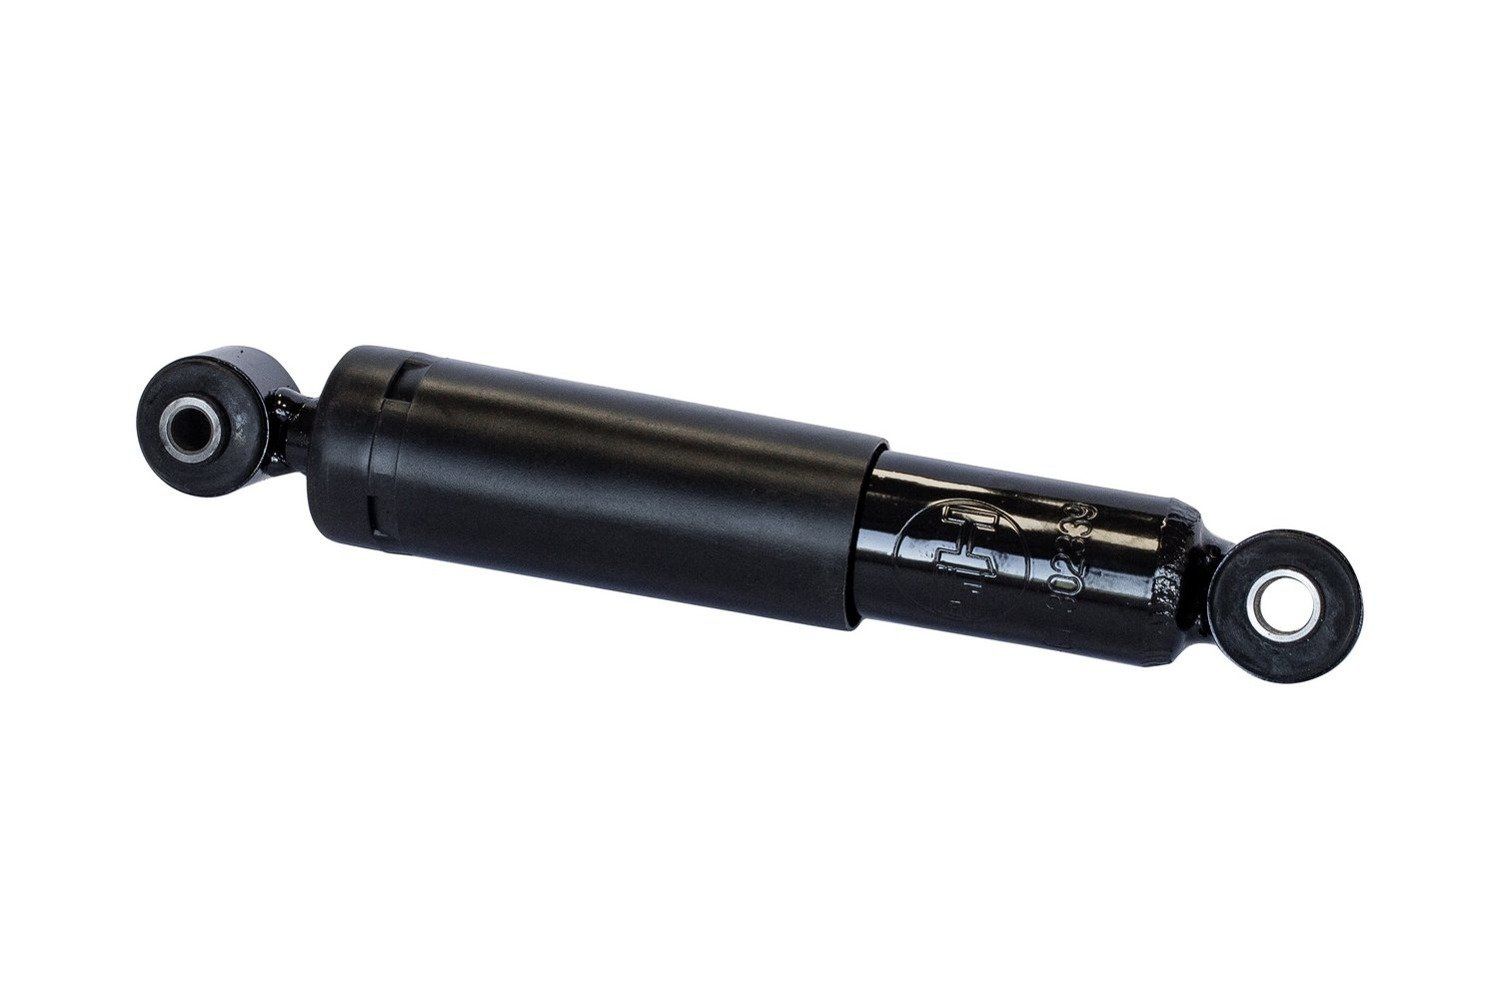 https://unitrailer.co.uk/hpeciai/ecea13f1ab03689040d9f64627a56aed/eng_pl_Hydraulic-shock-absorber-for-leaf-spring-trailers-266_1.jpg